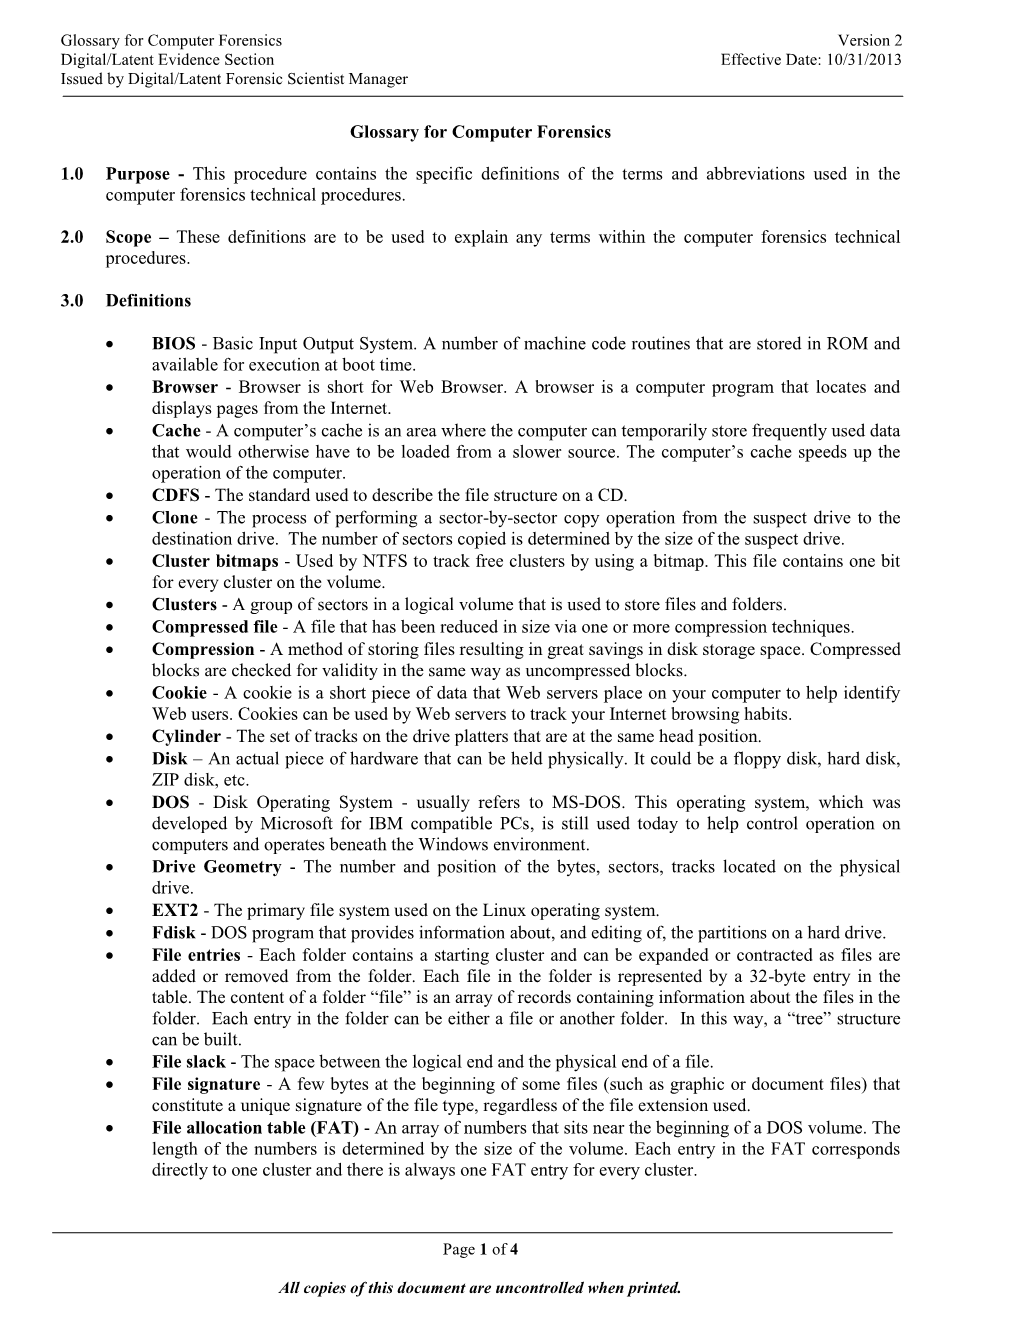 Glossary for Computer Forensics Version 2 Digital/Latent Evidence Section Effective Date: 10/31/2013 Issued by Digital/Latent Forensic Scientist Manager